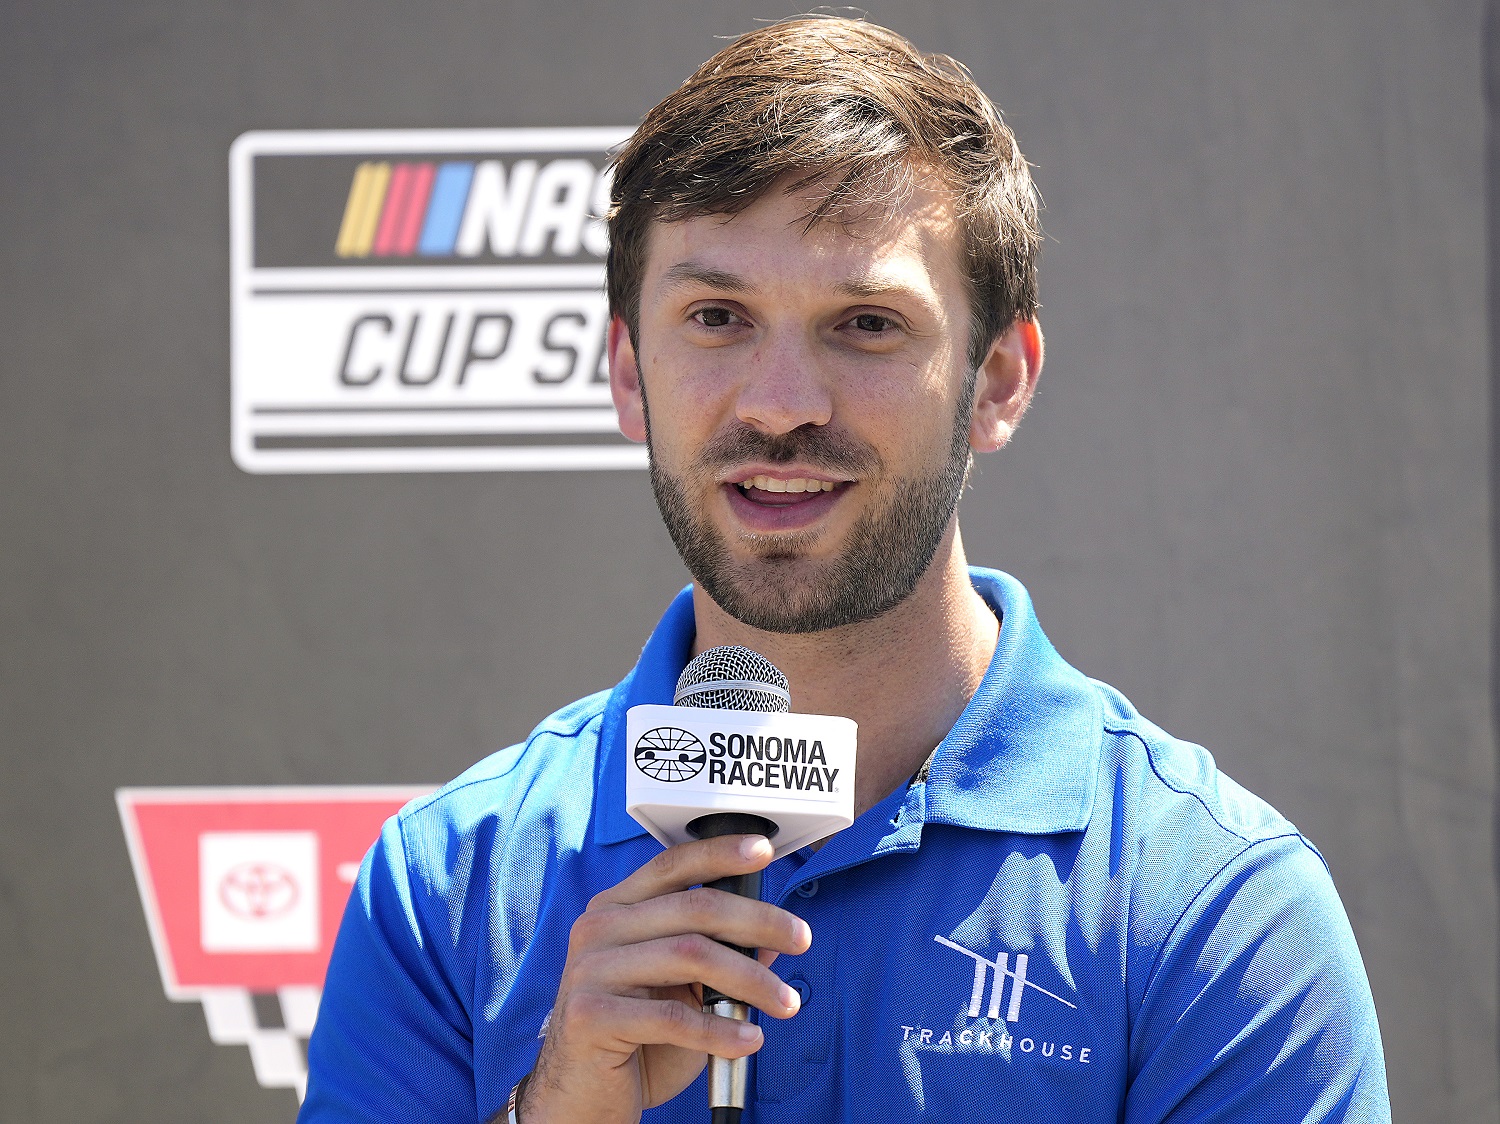 NASCAR driver Daniel Suarez speaks to the media during a press conference on June 9, 2022, in San Francisco, California.